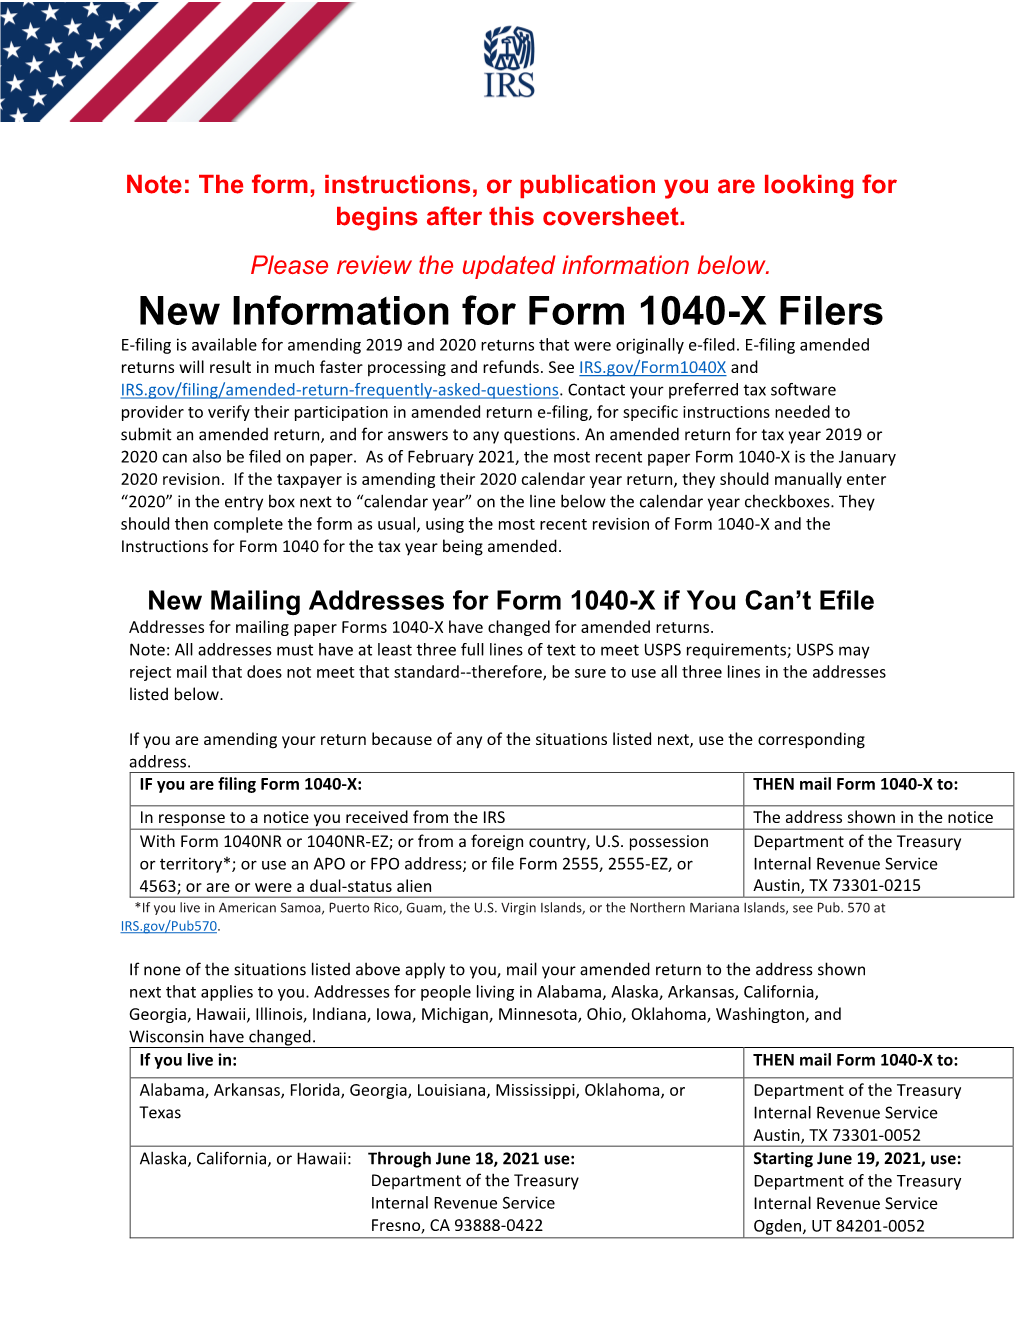 Instructions for Form 1040-X (Rev. January 2020) Page 3 of 21 Fileid: … S/I1040X/202001/A/XML/Cycle02/Source 16:37 - 9-Mar-2020